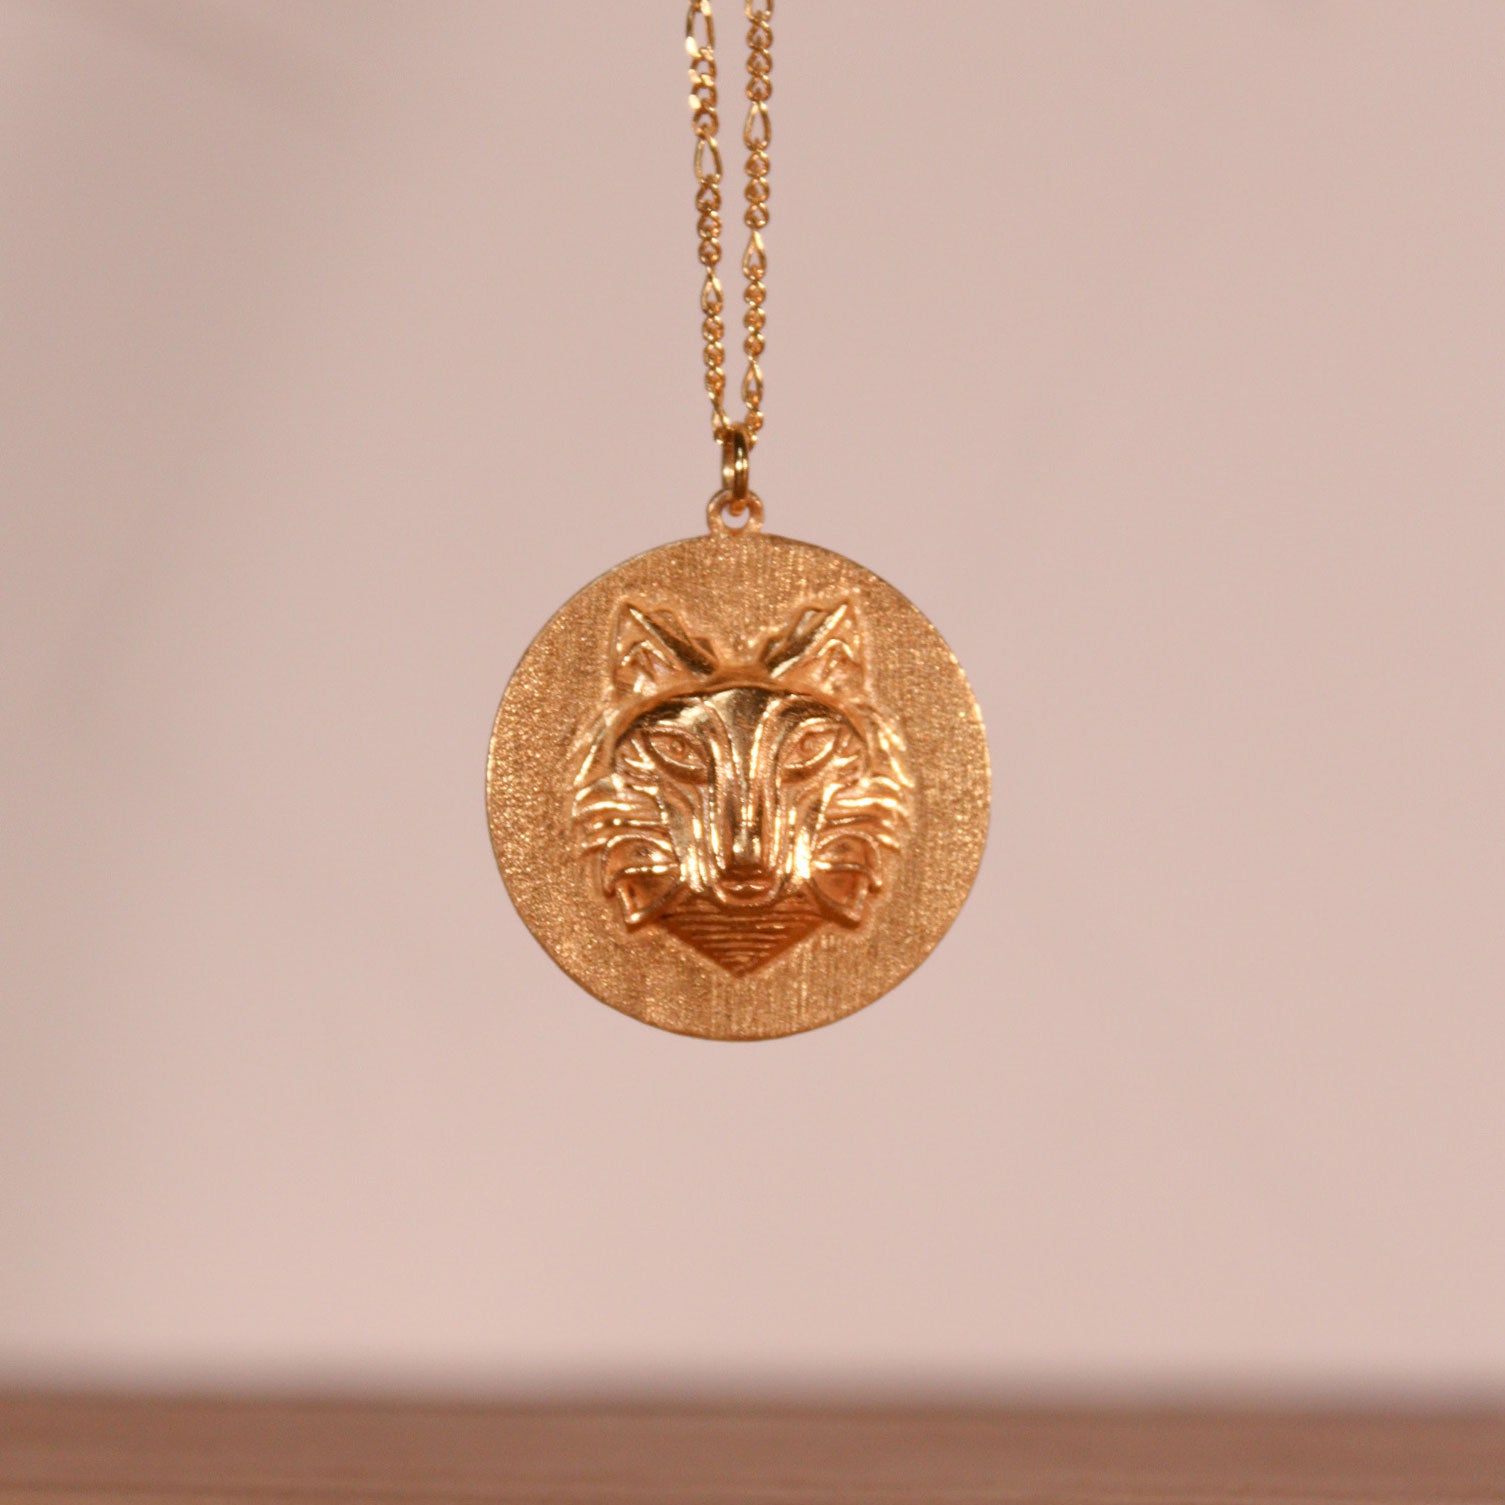 Spirit of the Wilderness - Wolf Pendant Necklace